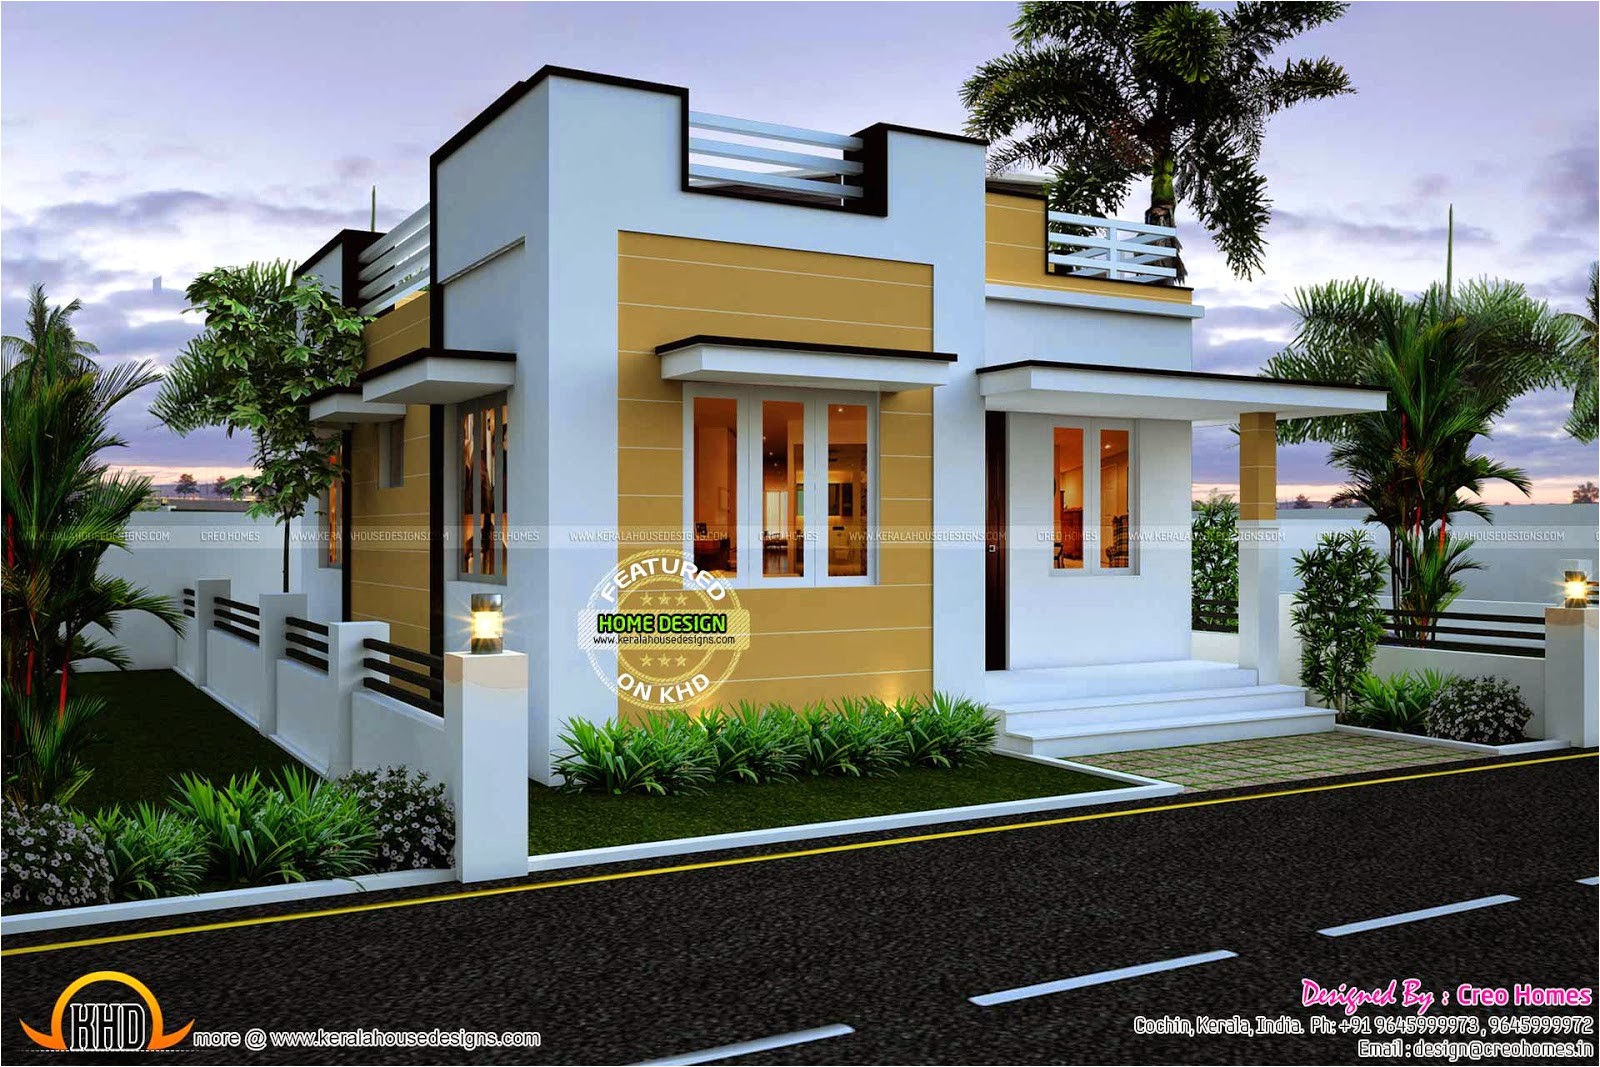 Budget Smart Home Plans House for 5 Lakhs In Kerala Kerala Home Design and Floor